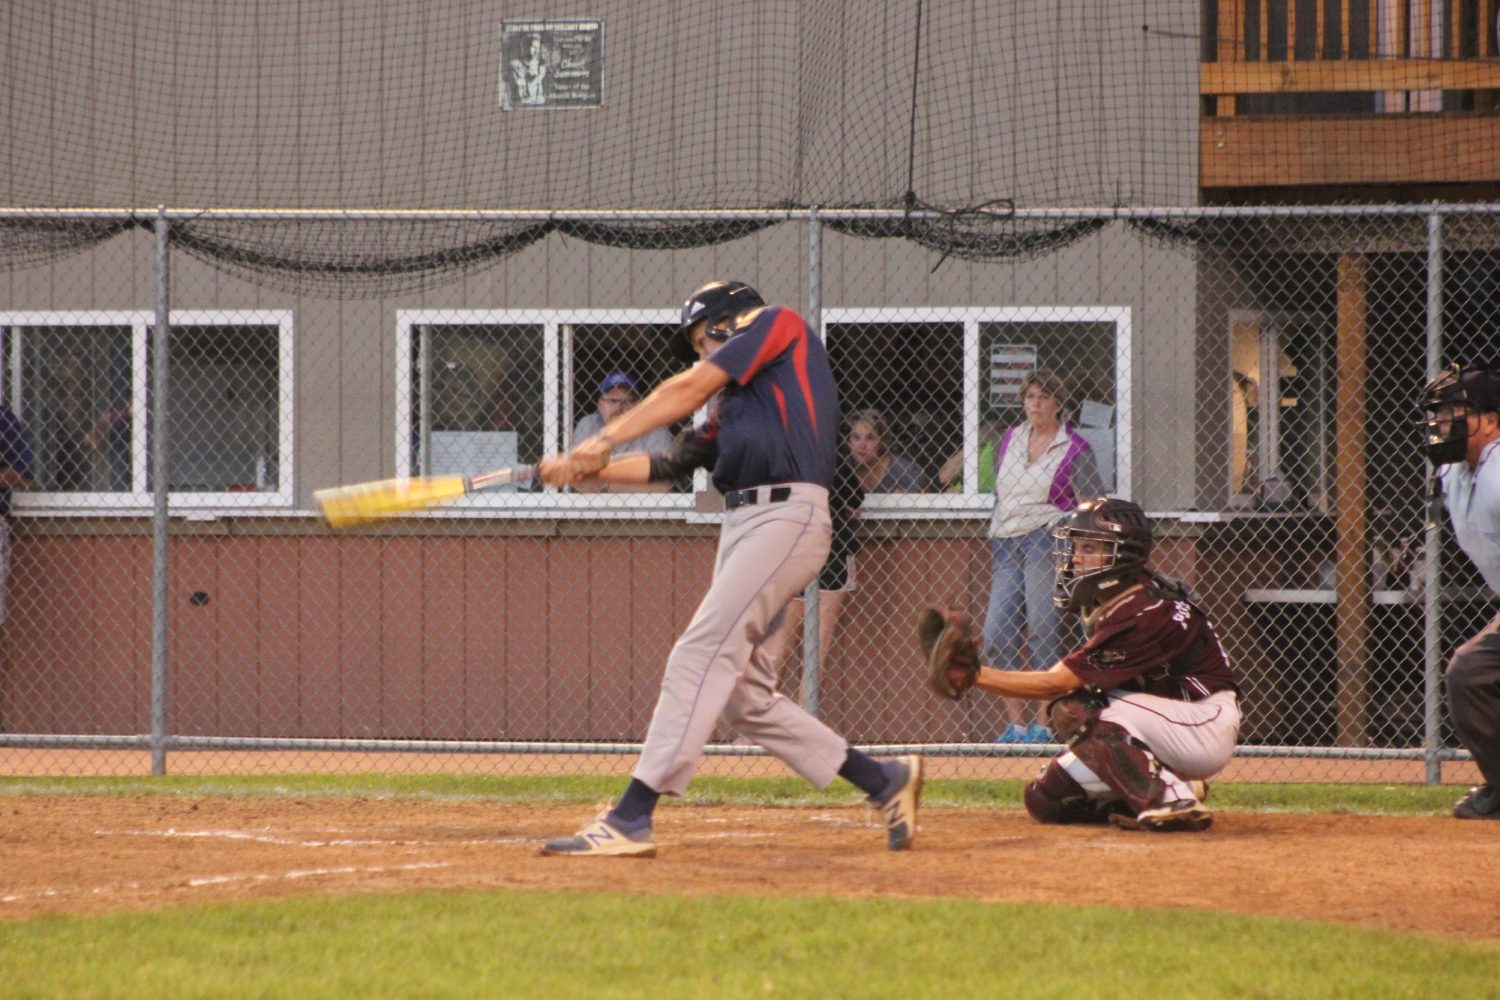 State Tournament short lived for Post 46